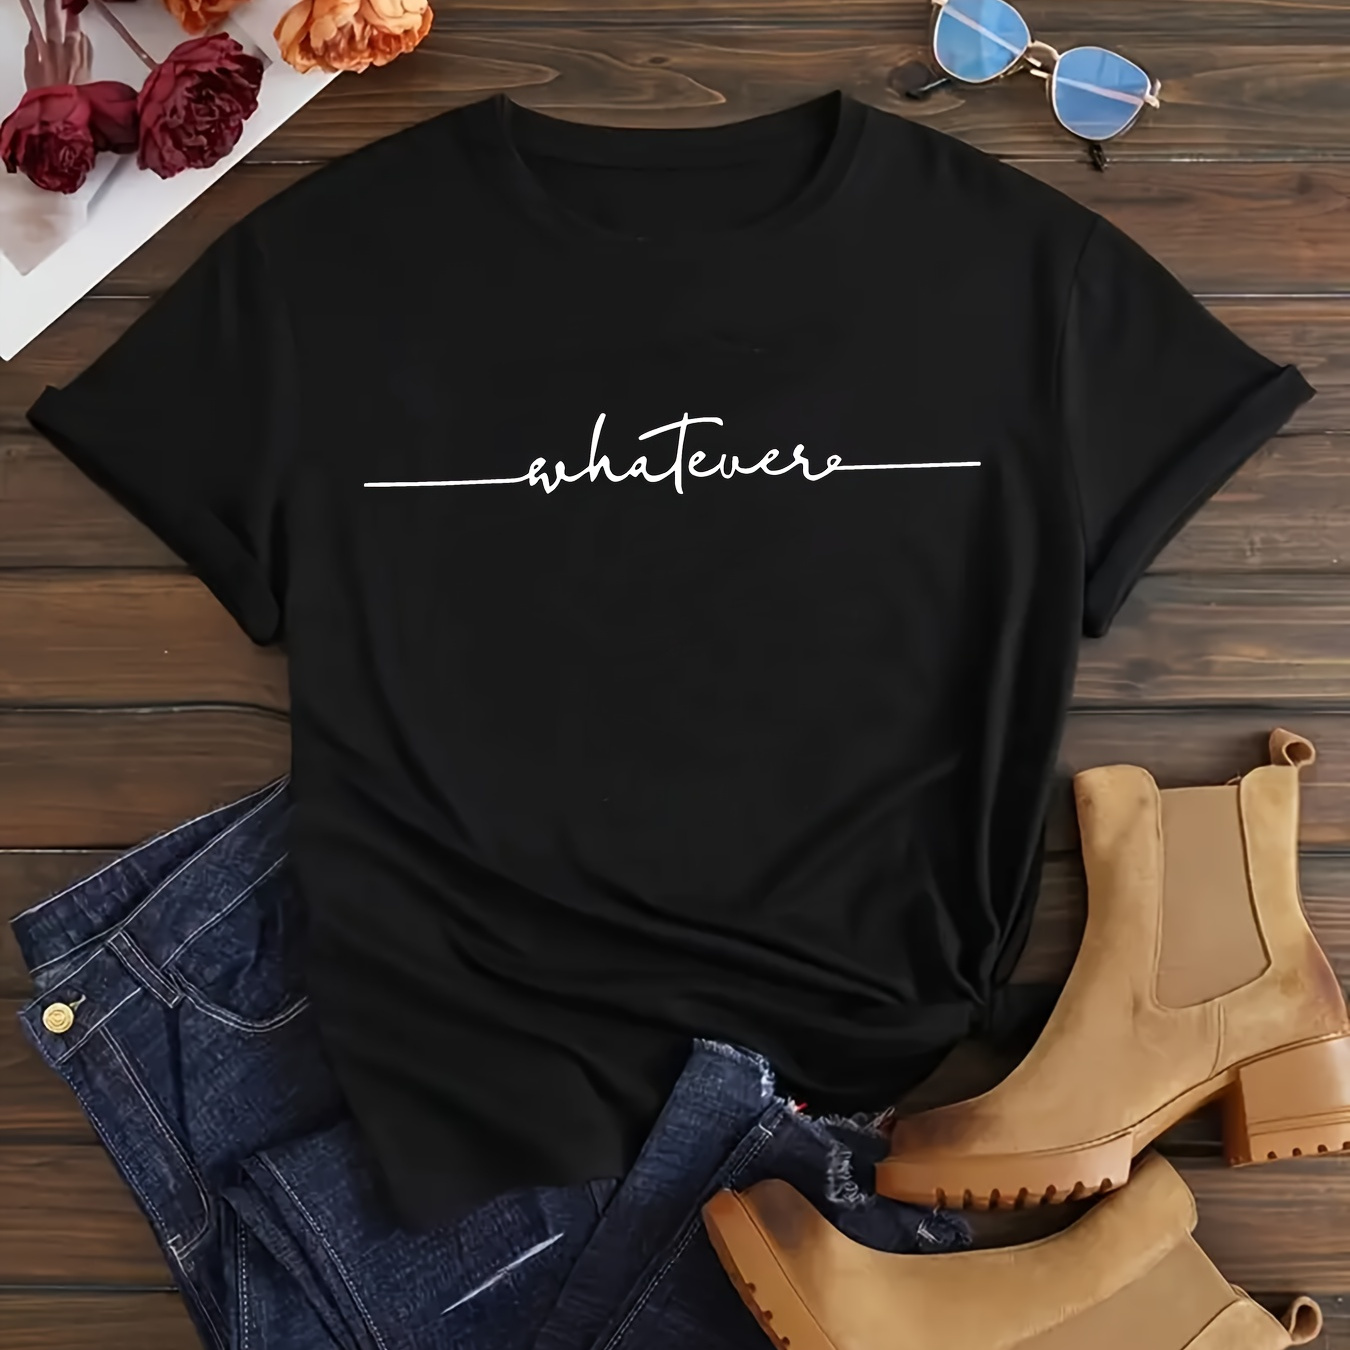 

Women's Casual "whatever" Slogan Fashion T-shirt, Short Sleeve Sporty Top, Relaxed Fit